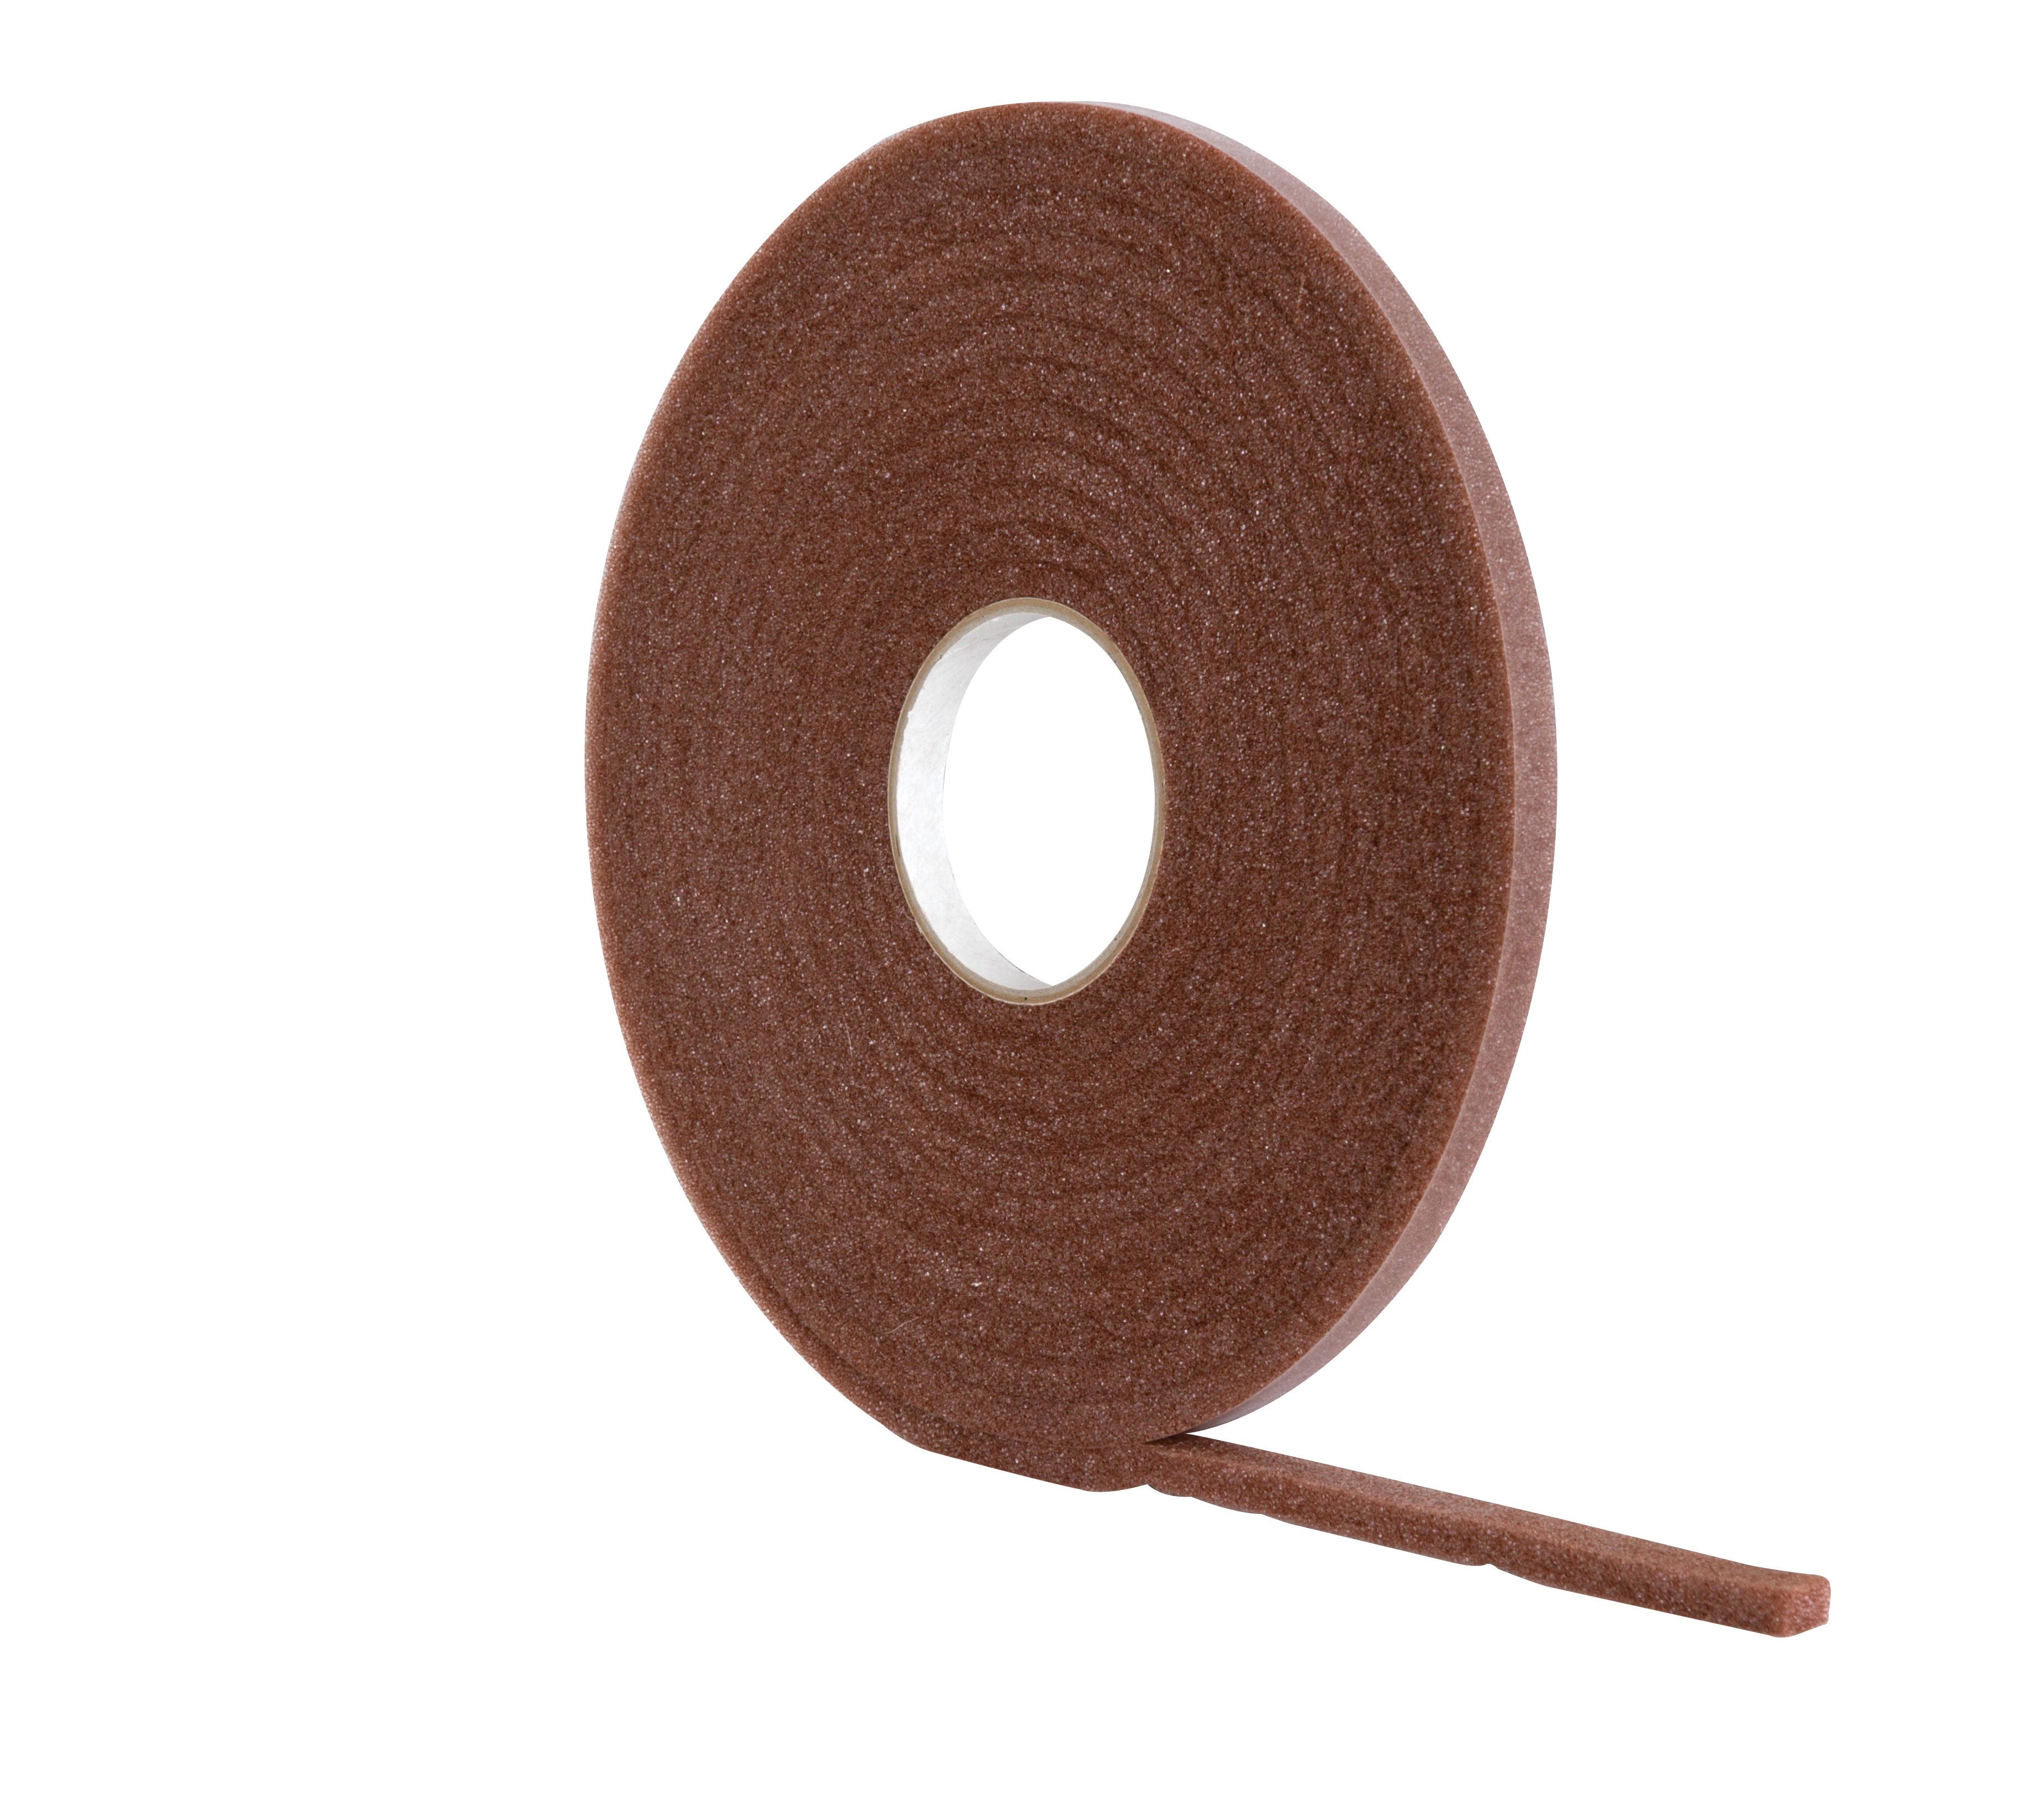 Image of Wickes Brown Soft Foam Draught Seal - 10m